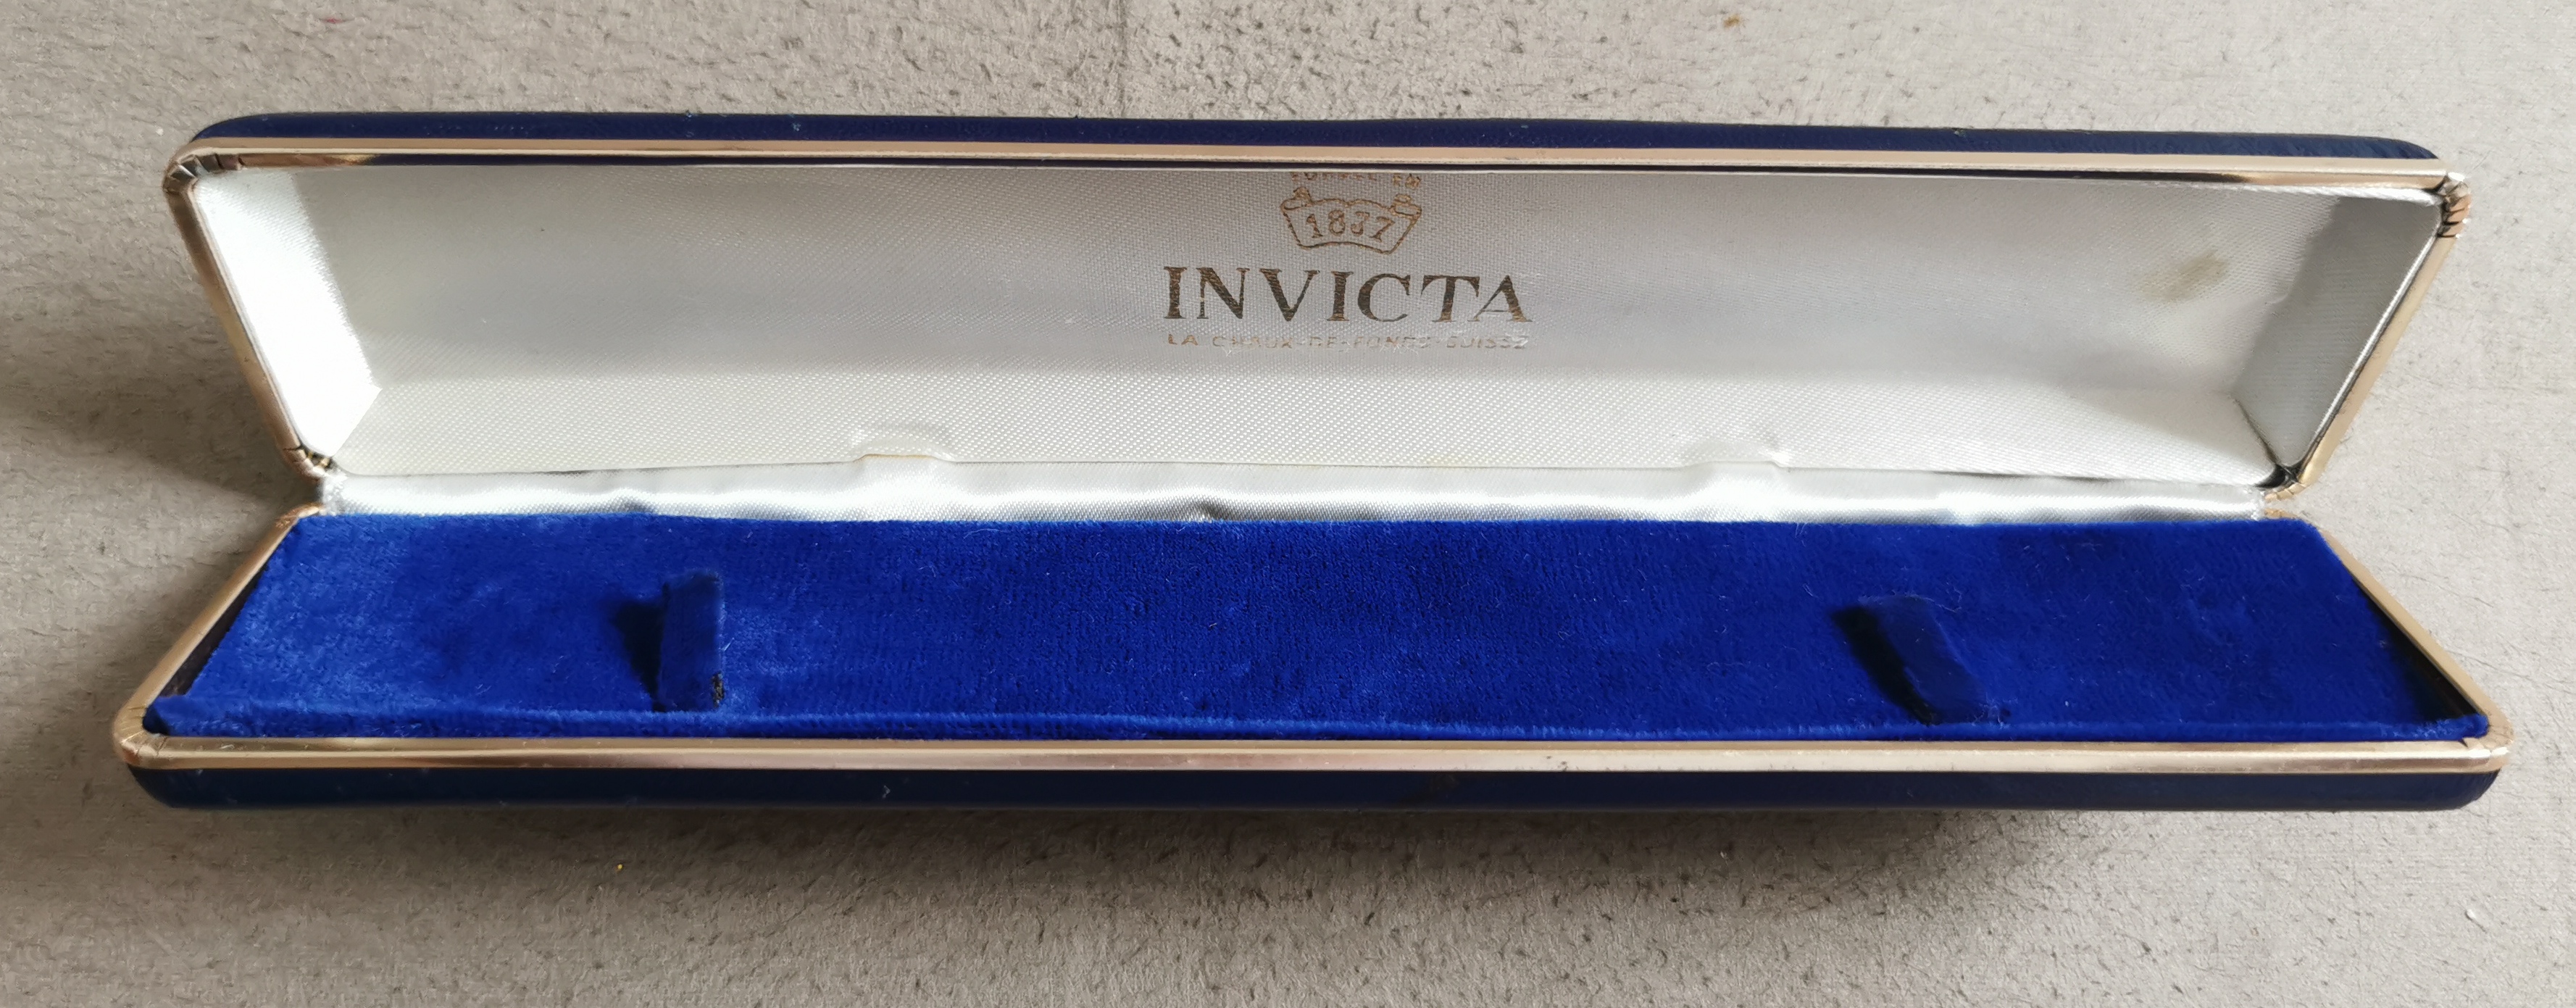 Invicta vintage watch box leather blu for lady models used condition 60's | San Giorgio a Cremano